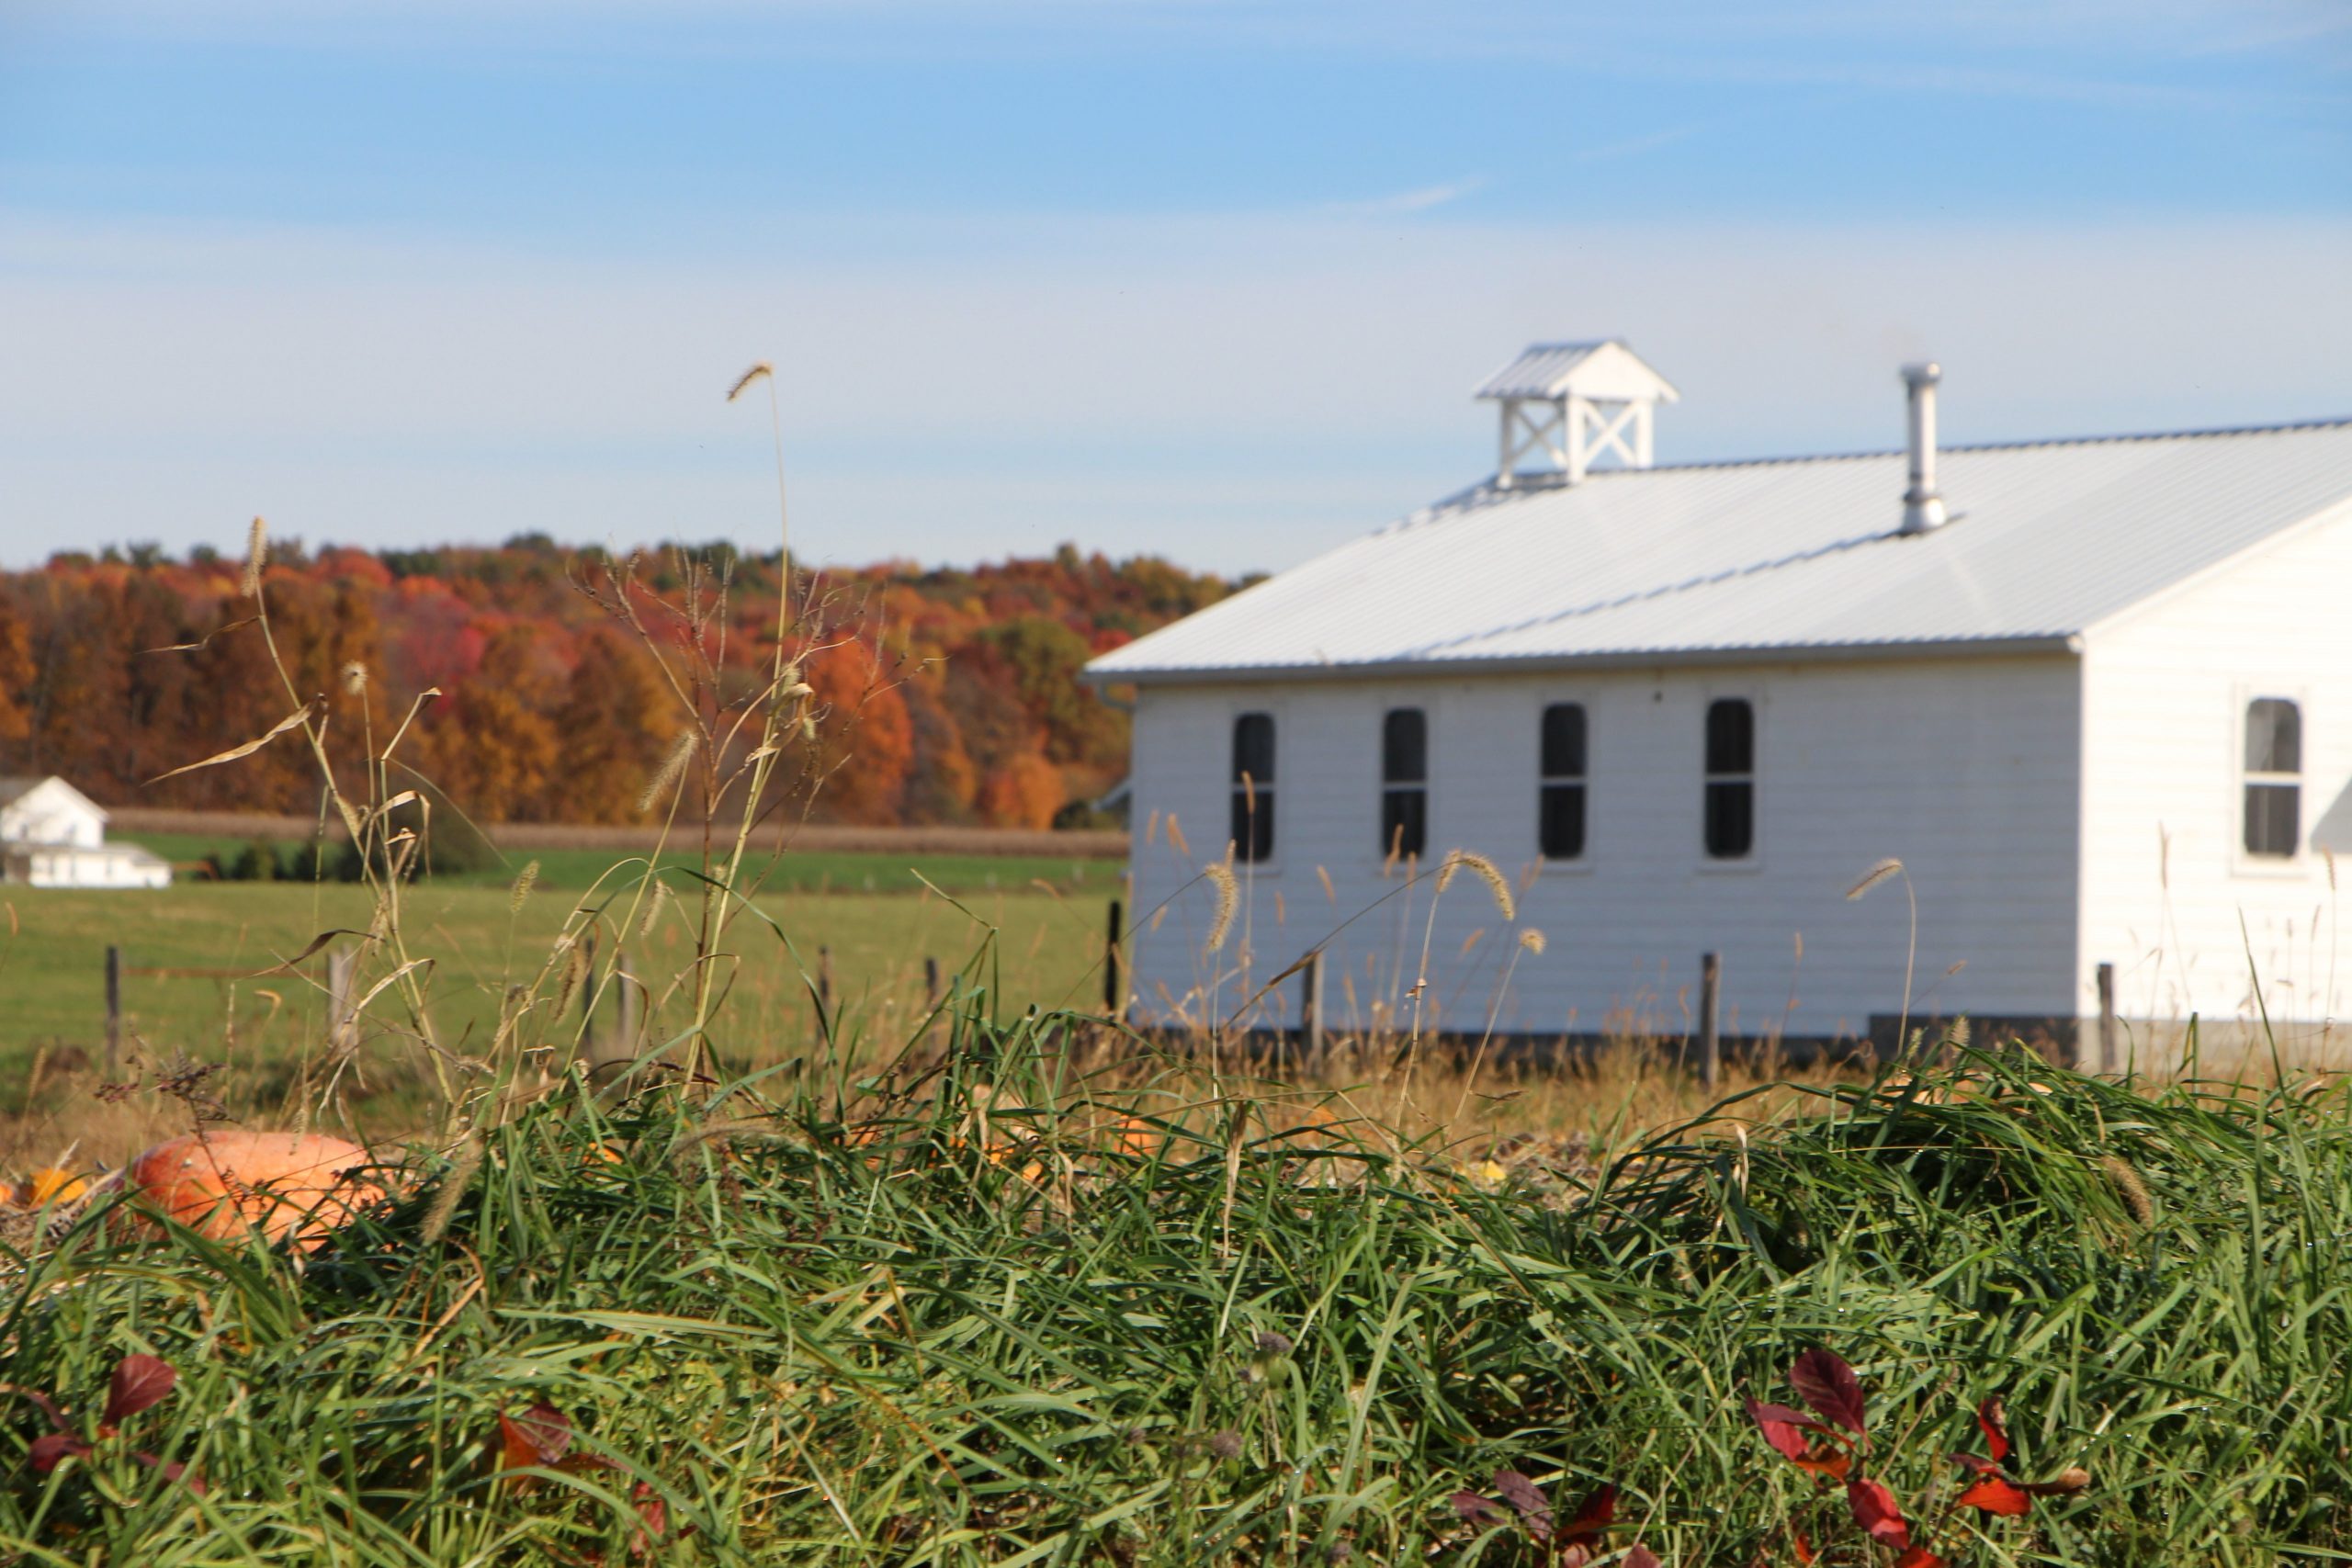 Stock photo of an Amish schoolhouse in a field with trees in fall colors in the background.